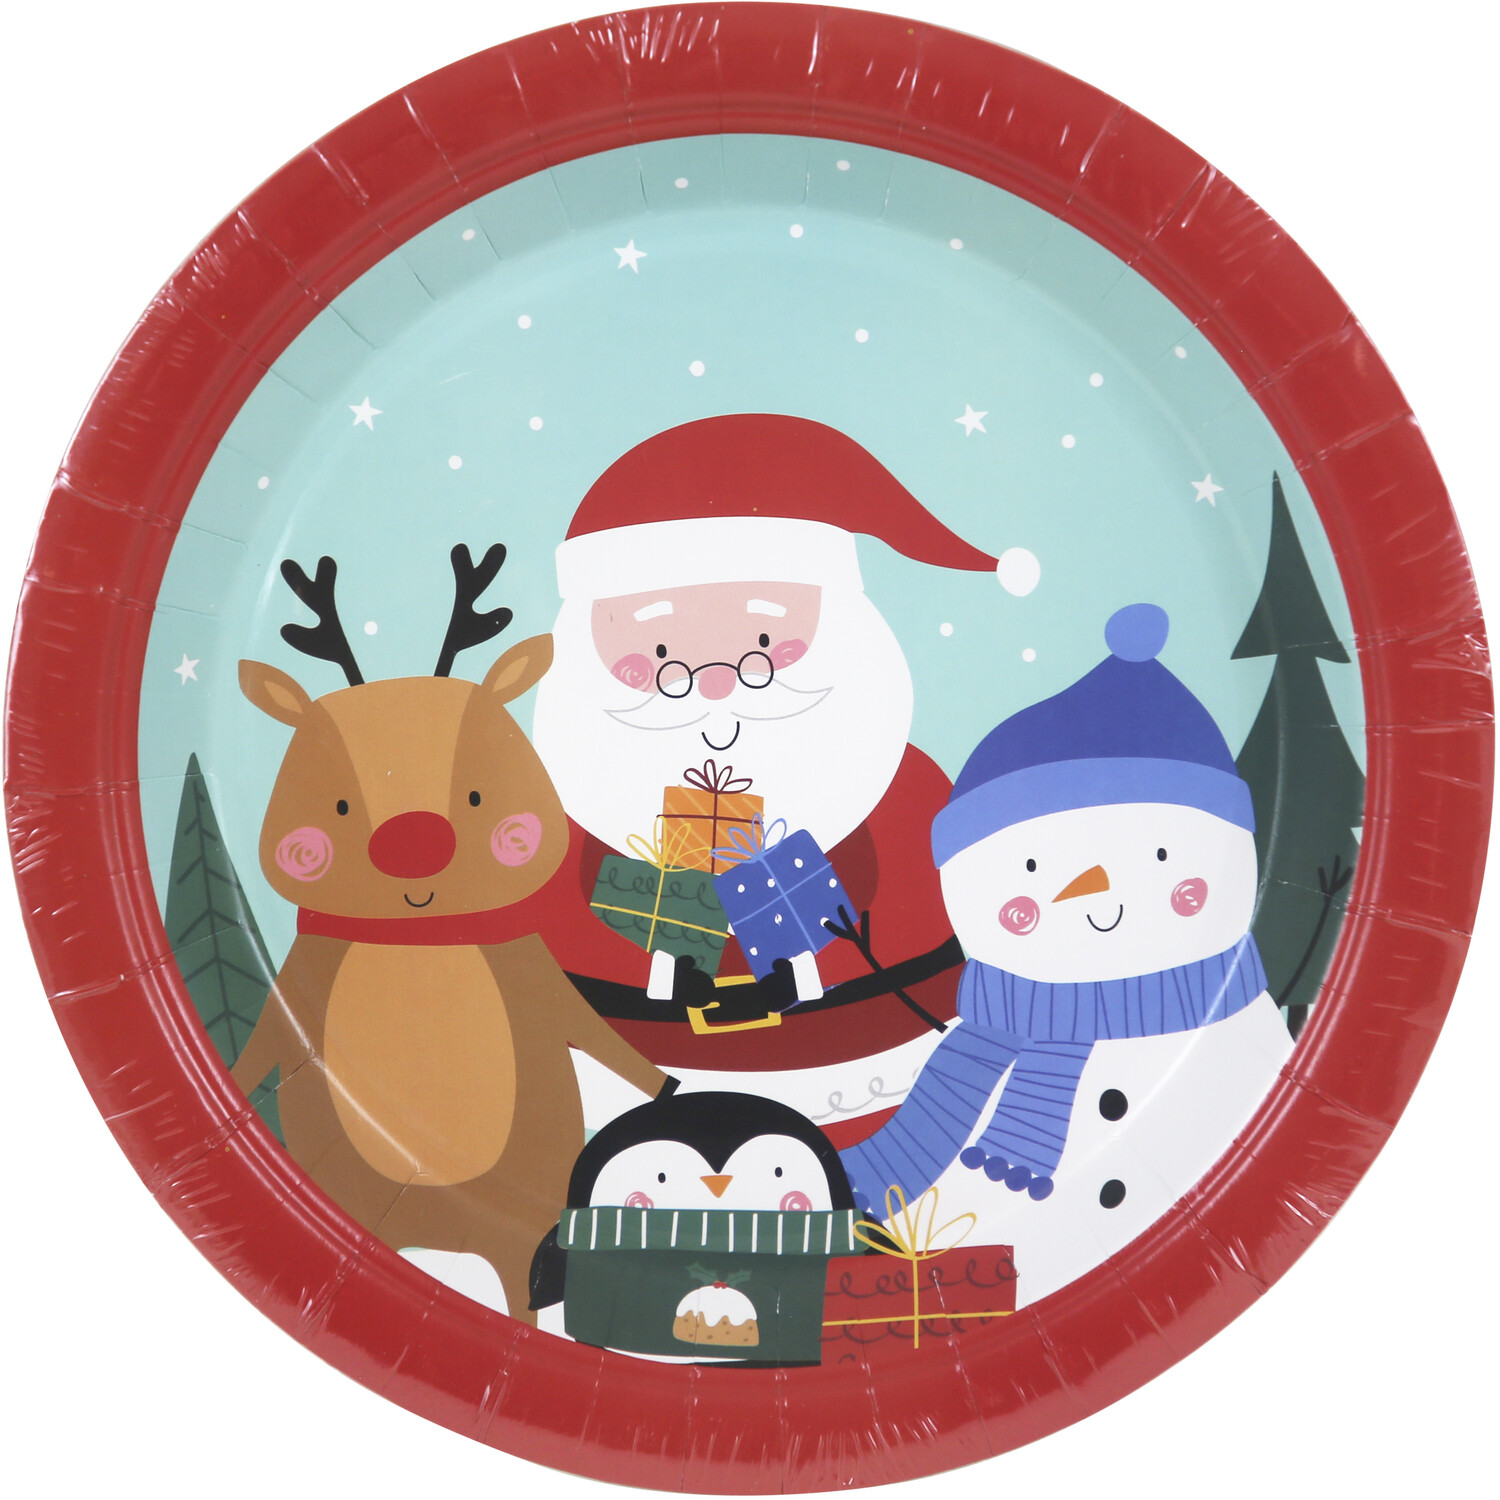 25-Piece Christmas Party Pack Image 2